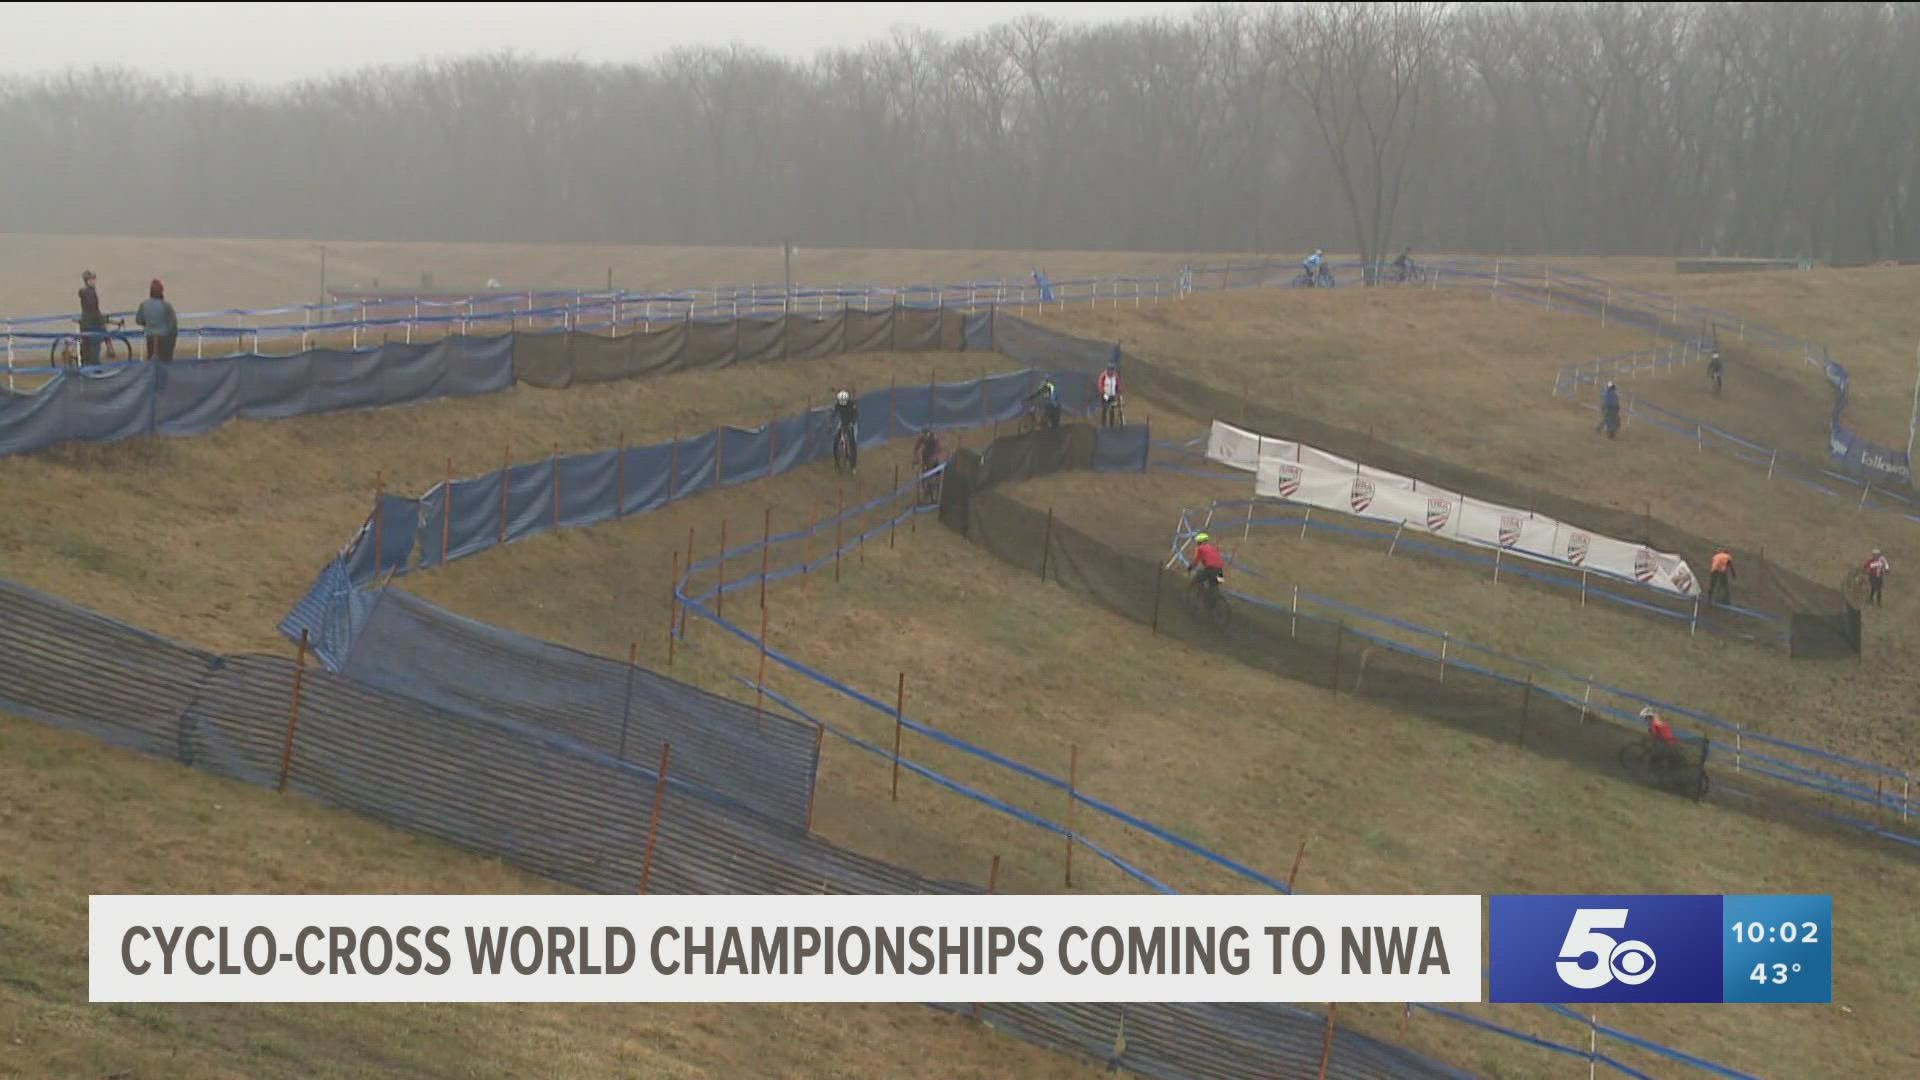 This week, Fayetteville is hosting the 2022 Cyclo-Cross World Championships, bringing thousands of spectators from around the country and the world to the NWA area.